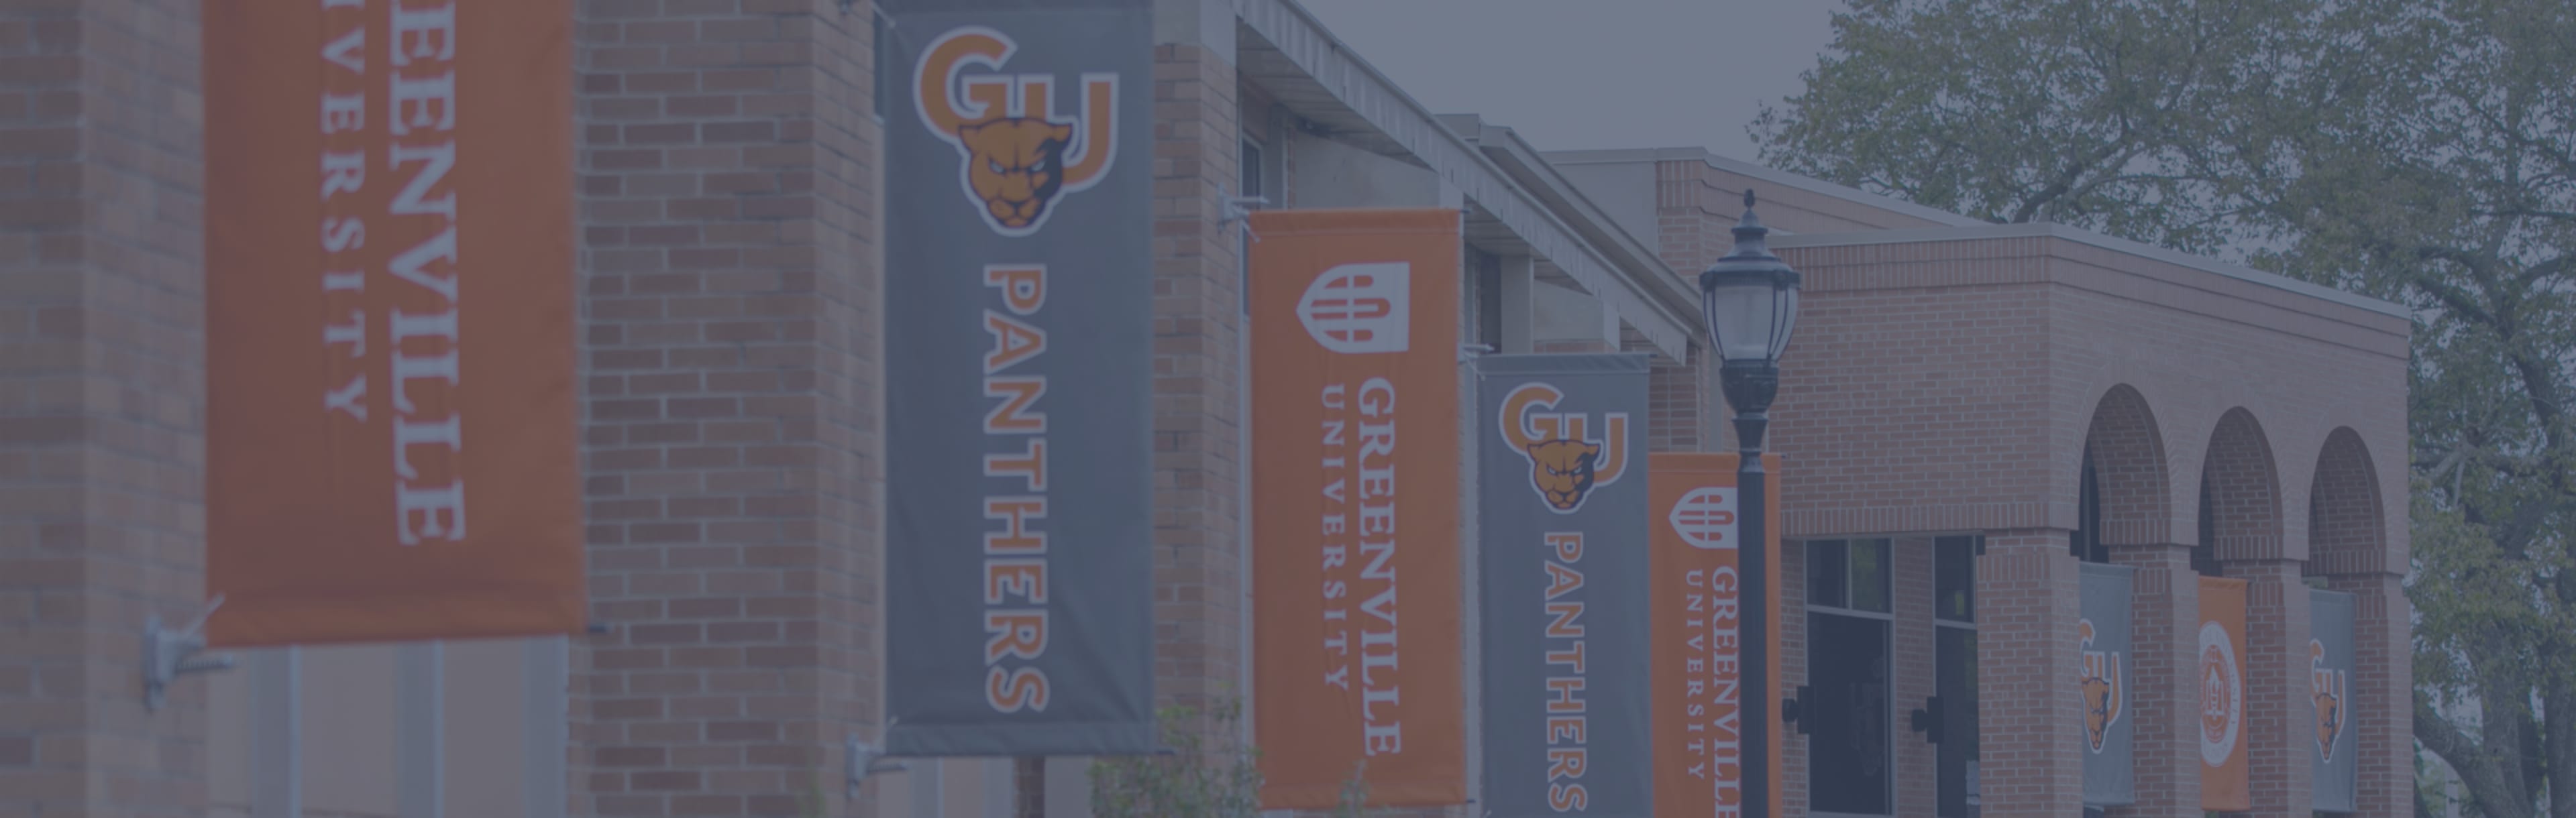 Greenville University Online Master of Arts in Education - Coaching